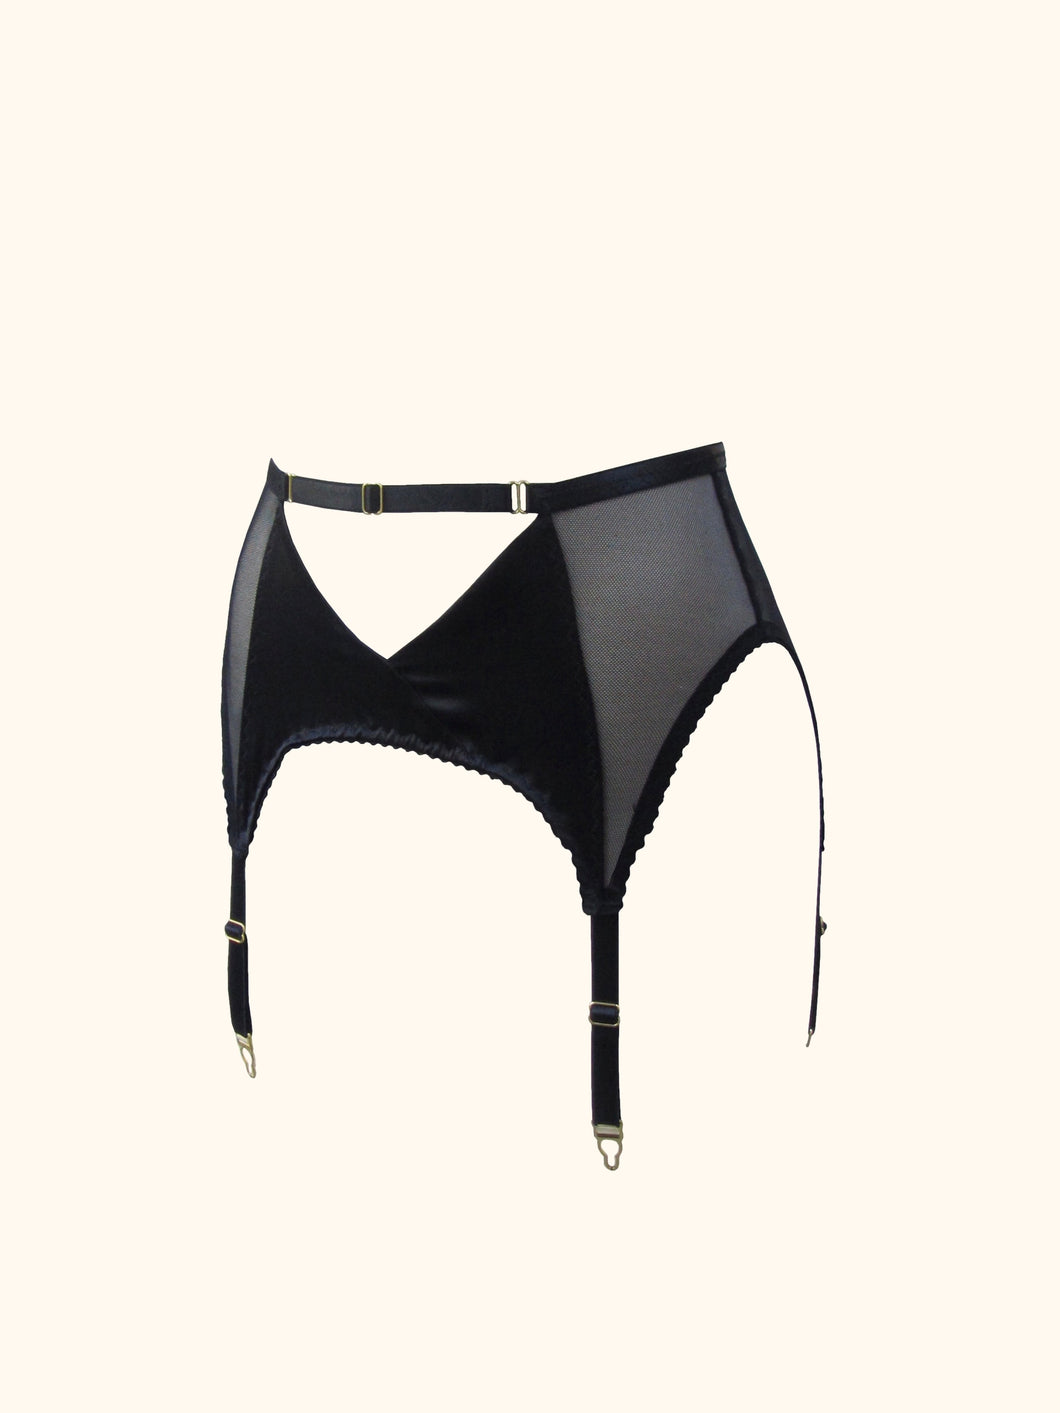 The front of the Win suspender belt. The belt has 4 straps and gold hardware. The front panels are silk and cross over to create an inverted triangle cut out below the waist. An adjustable waistband strap runs above this.